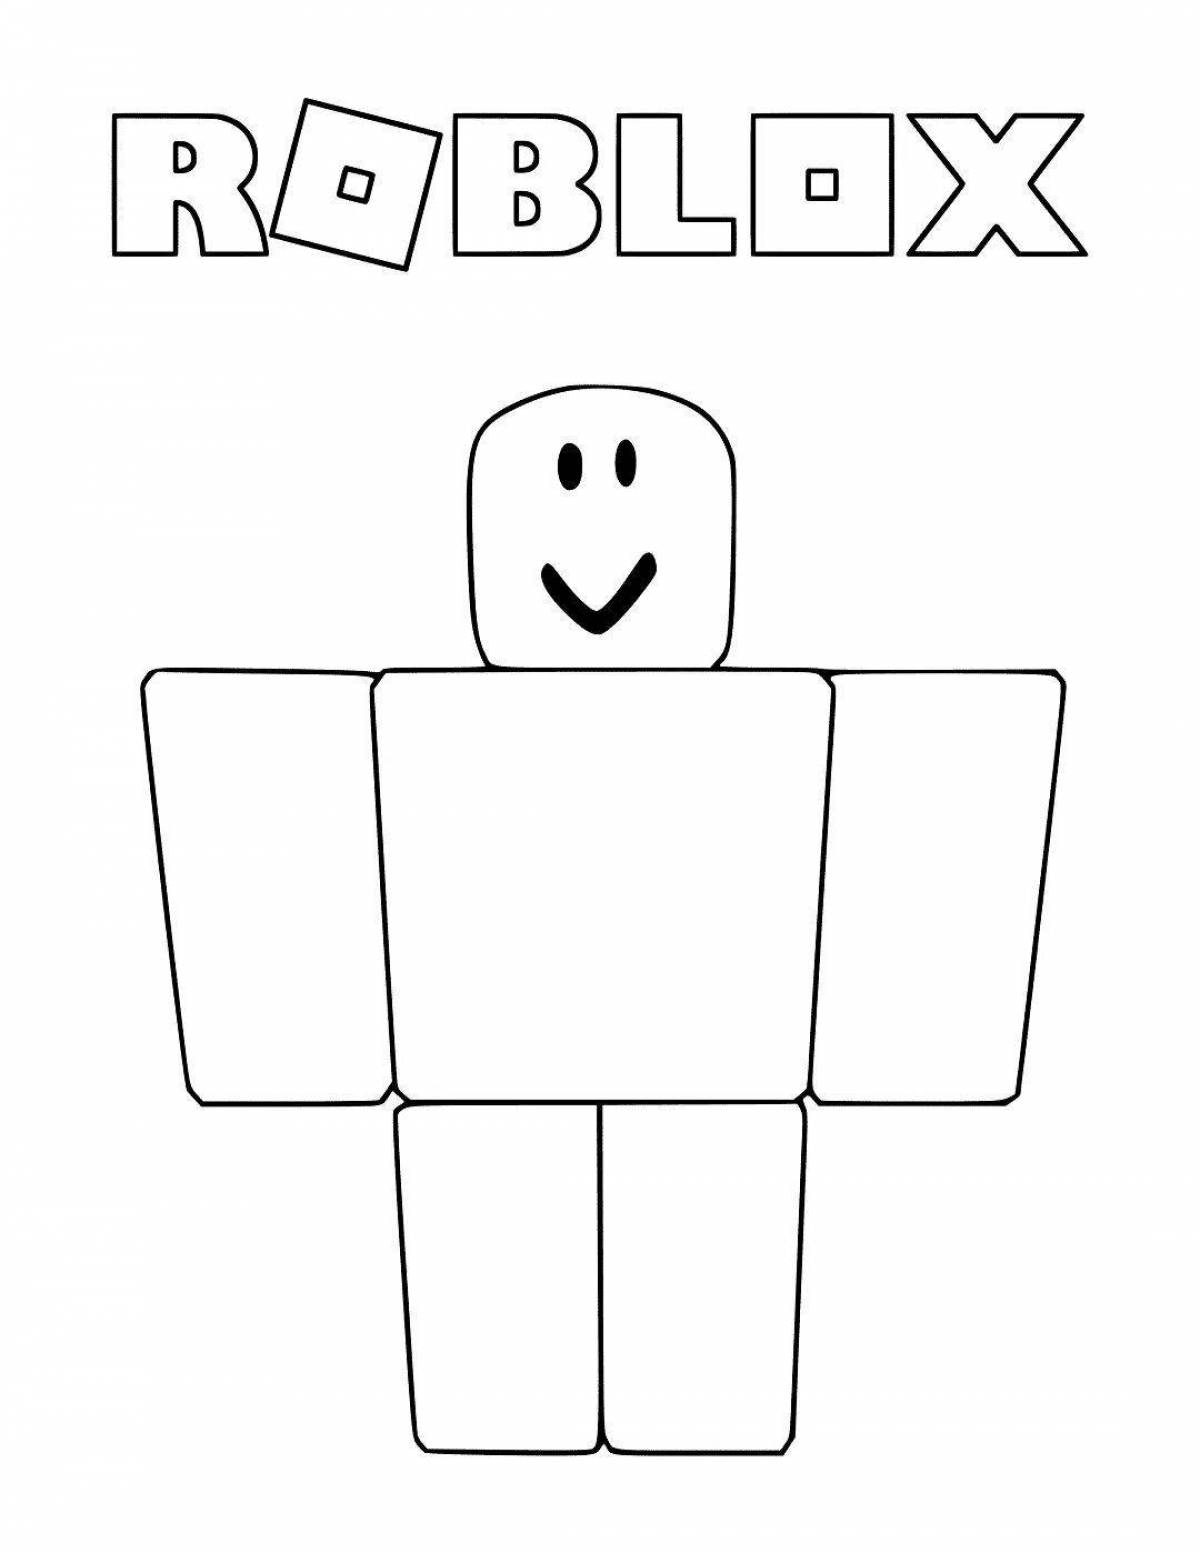 Incredible roblox coloring book for girls